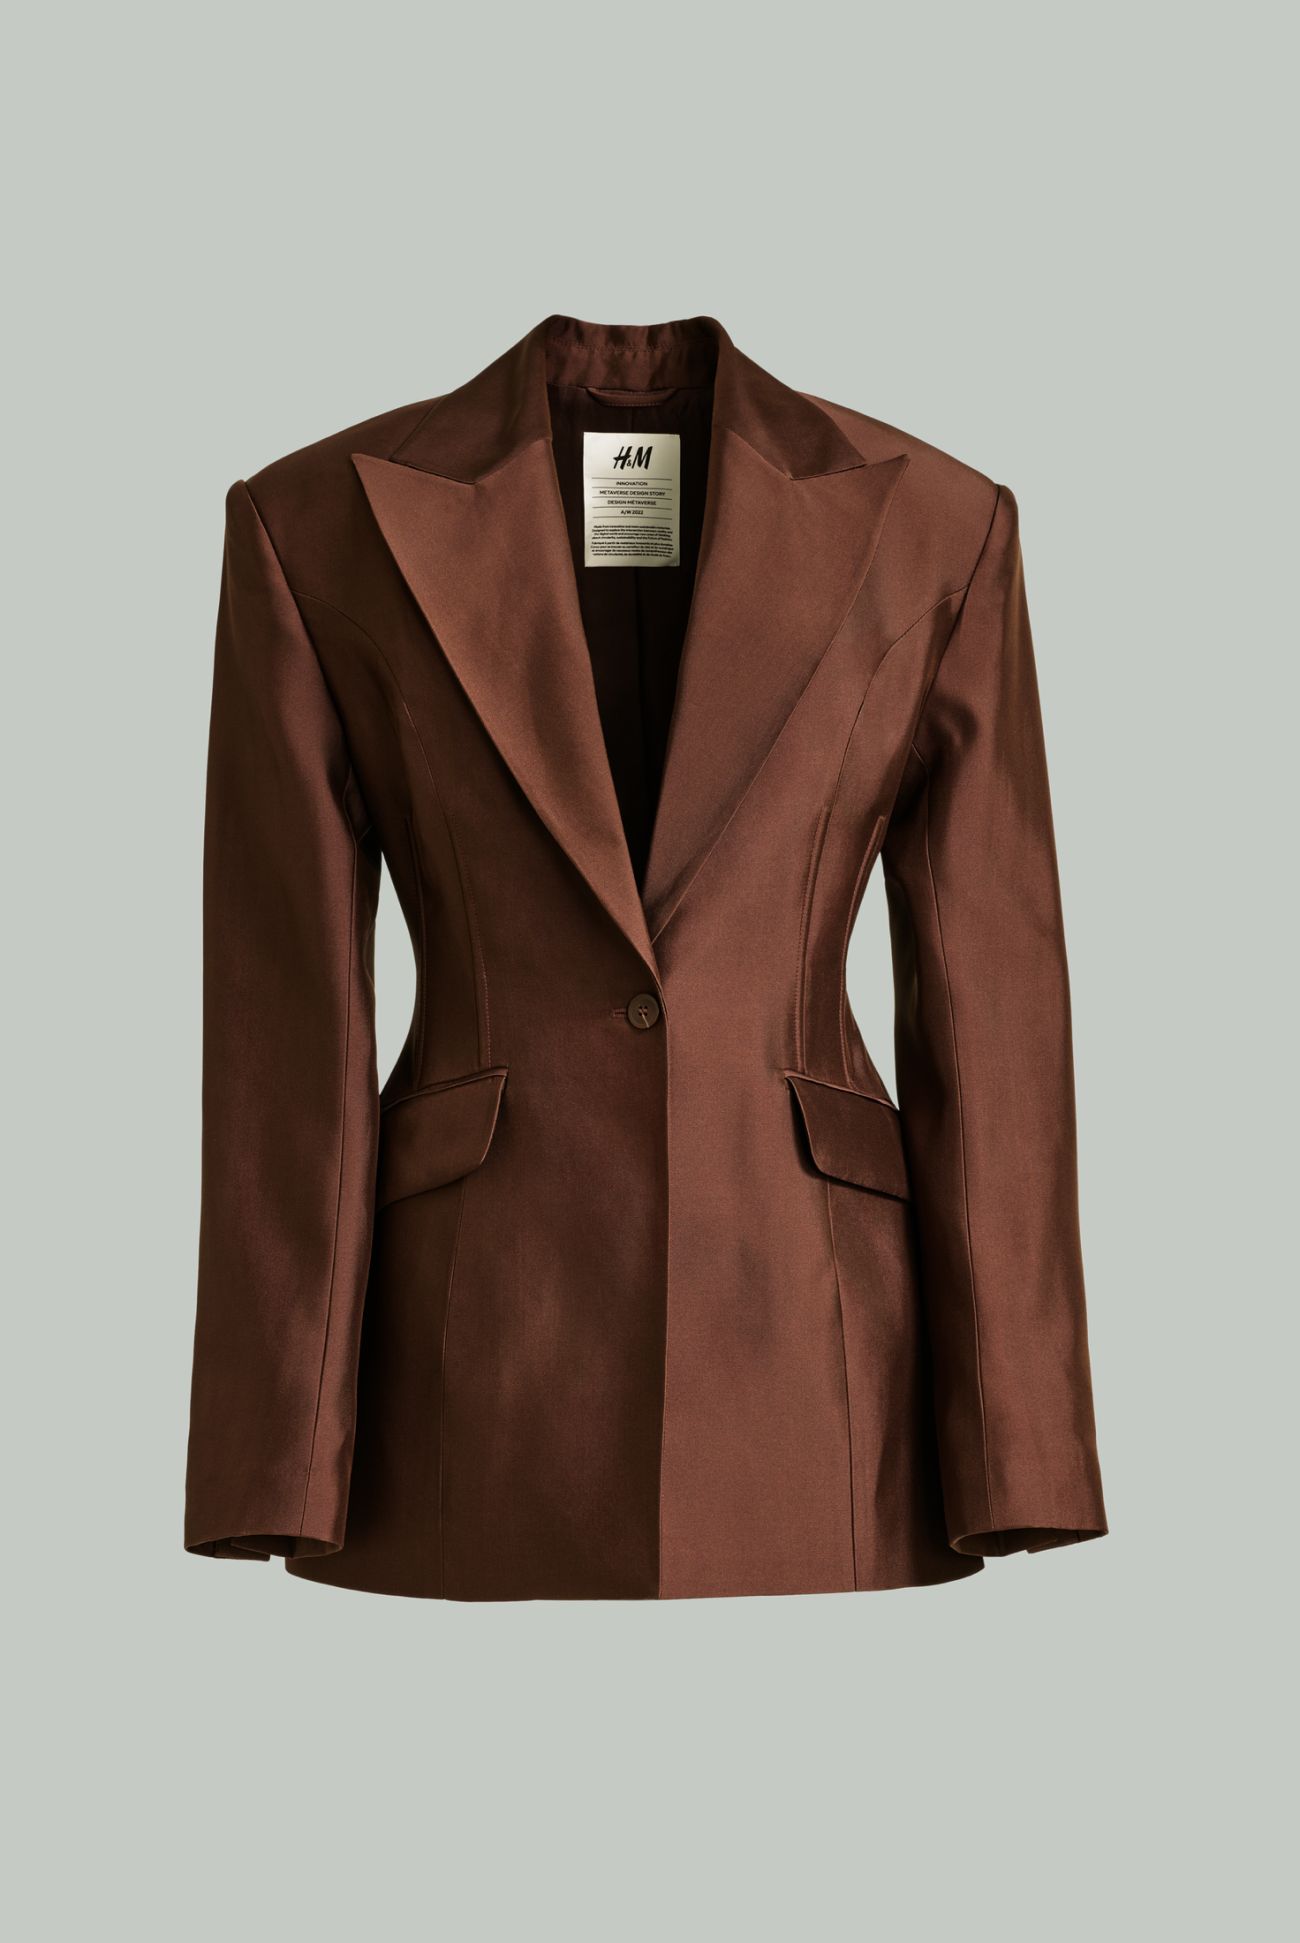 Naia™ Renew hourglass jacket | H&M (UK, MY, IN, SG, PH, TW, HK)